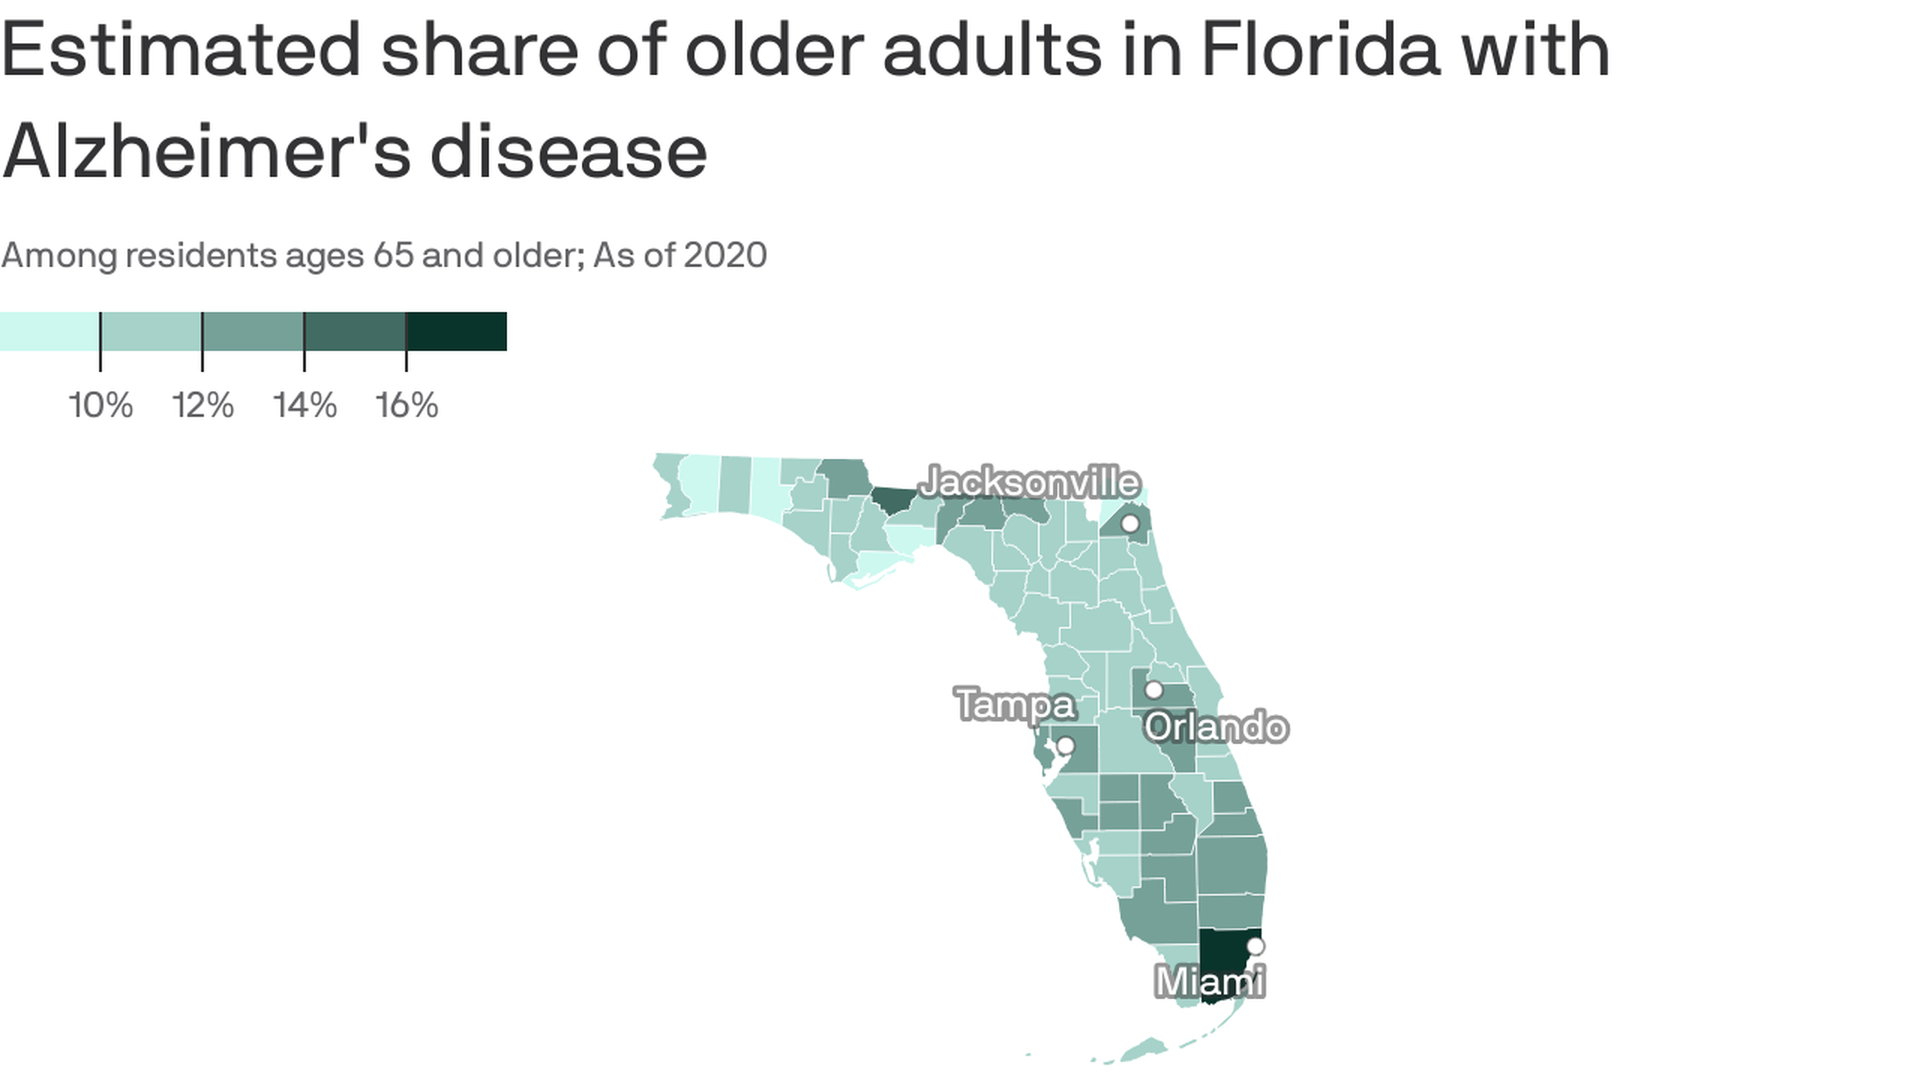 A map showing where Florida has the highest share of older adults with Alzheimer's, with the Miami area showing as the highest prevalence.